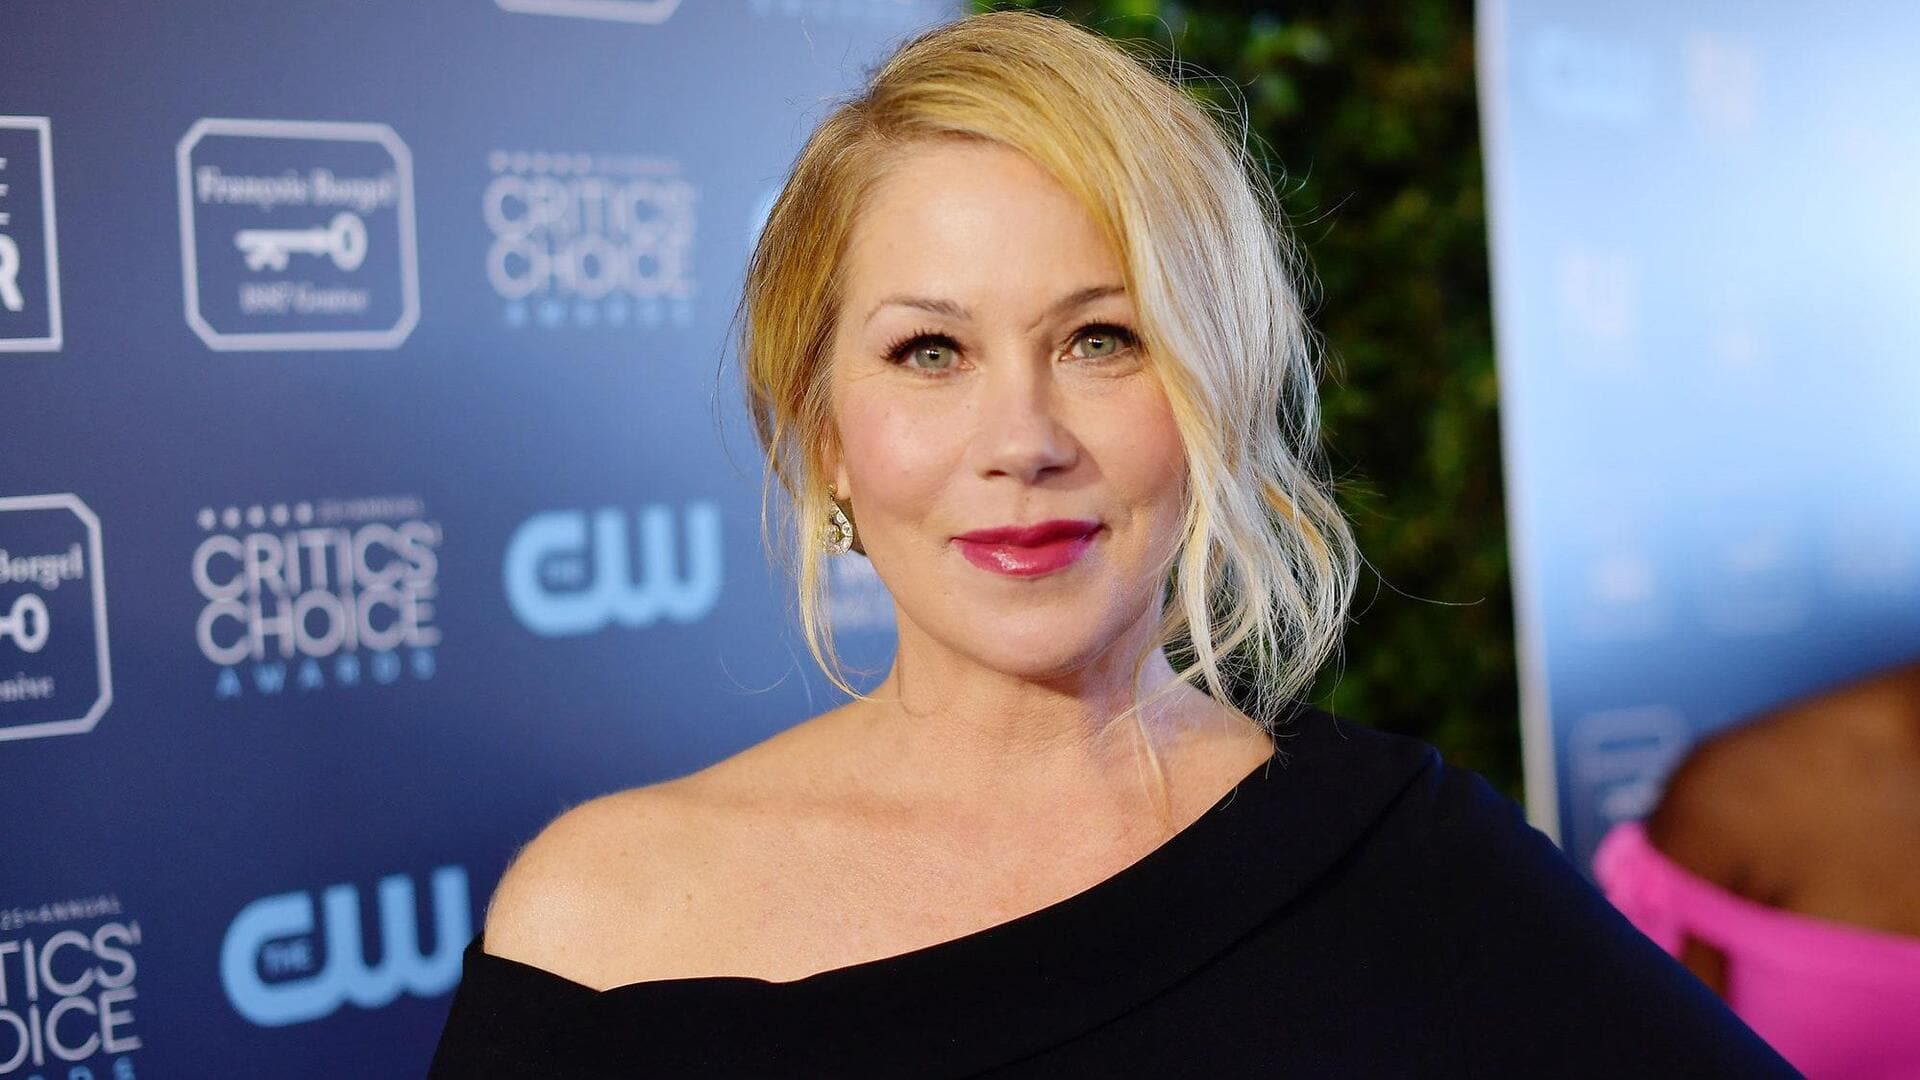 Christina Applegate's brave journey through multiple sclerosis: A closer look